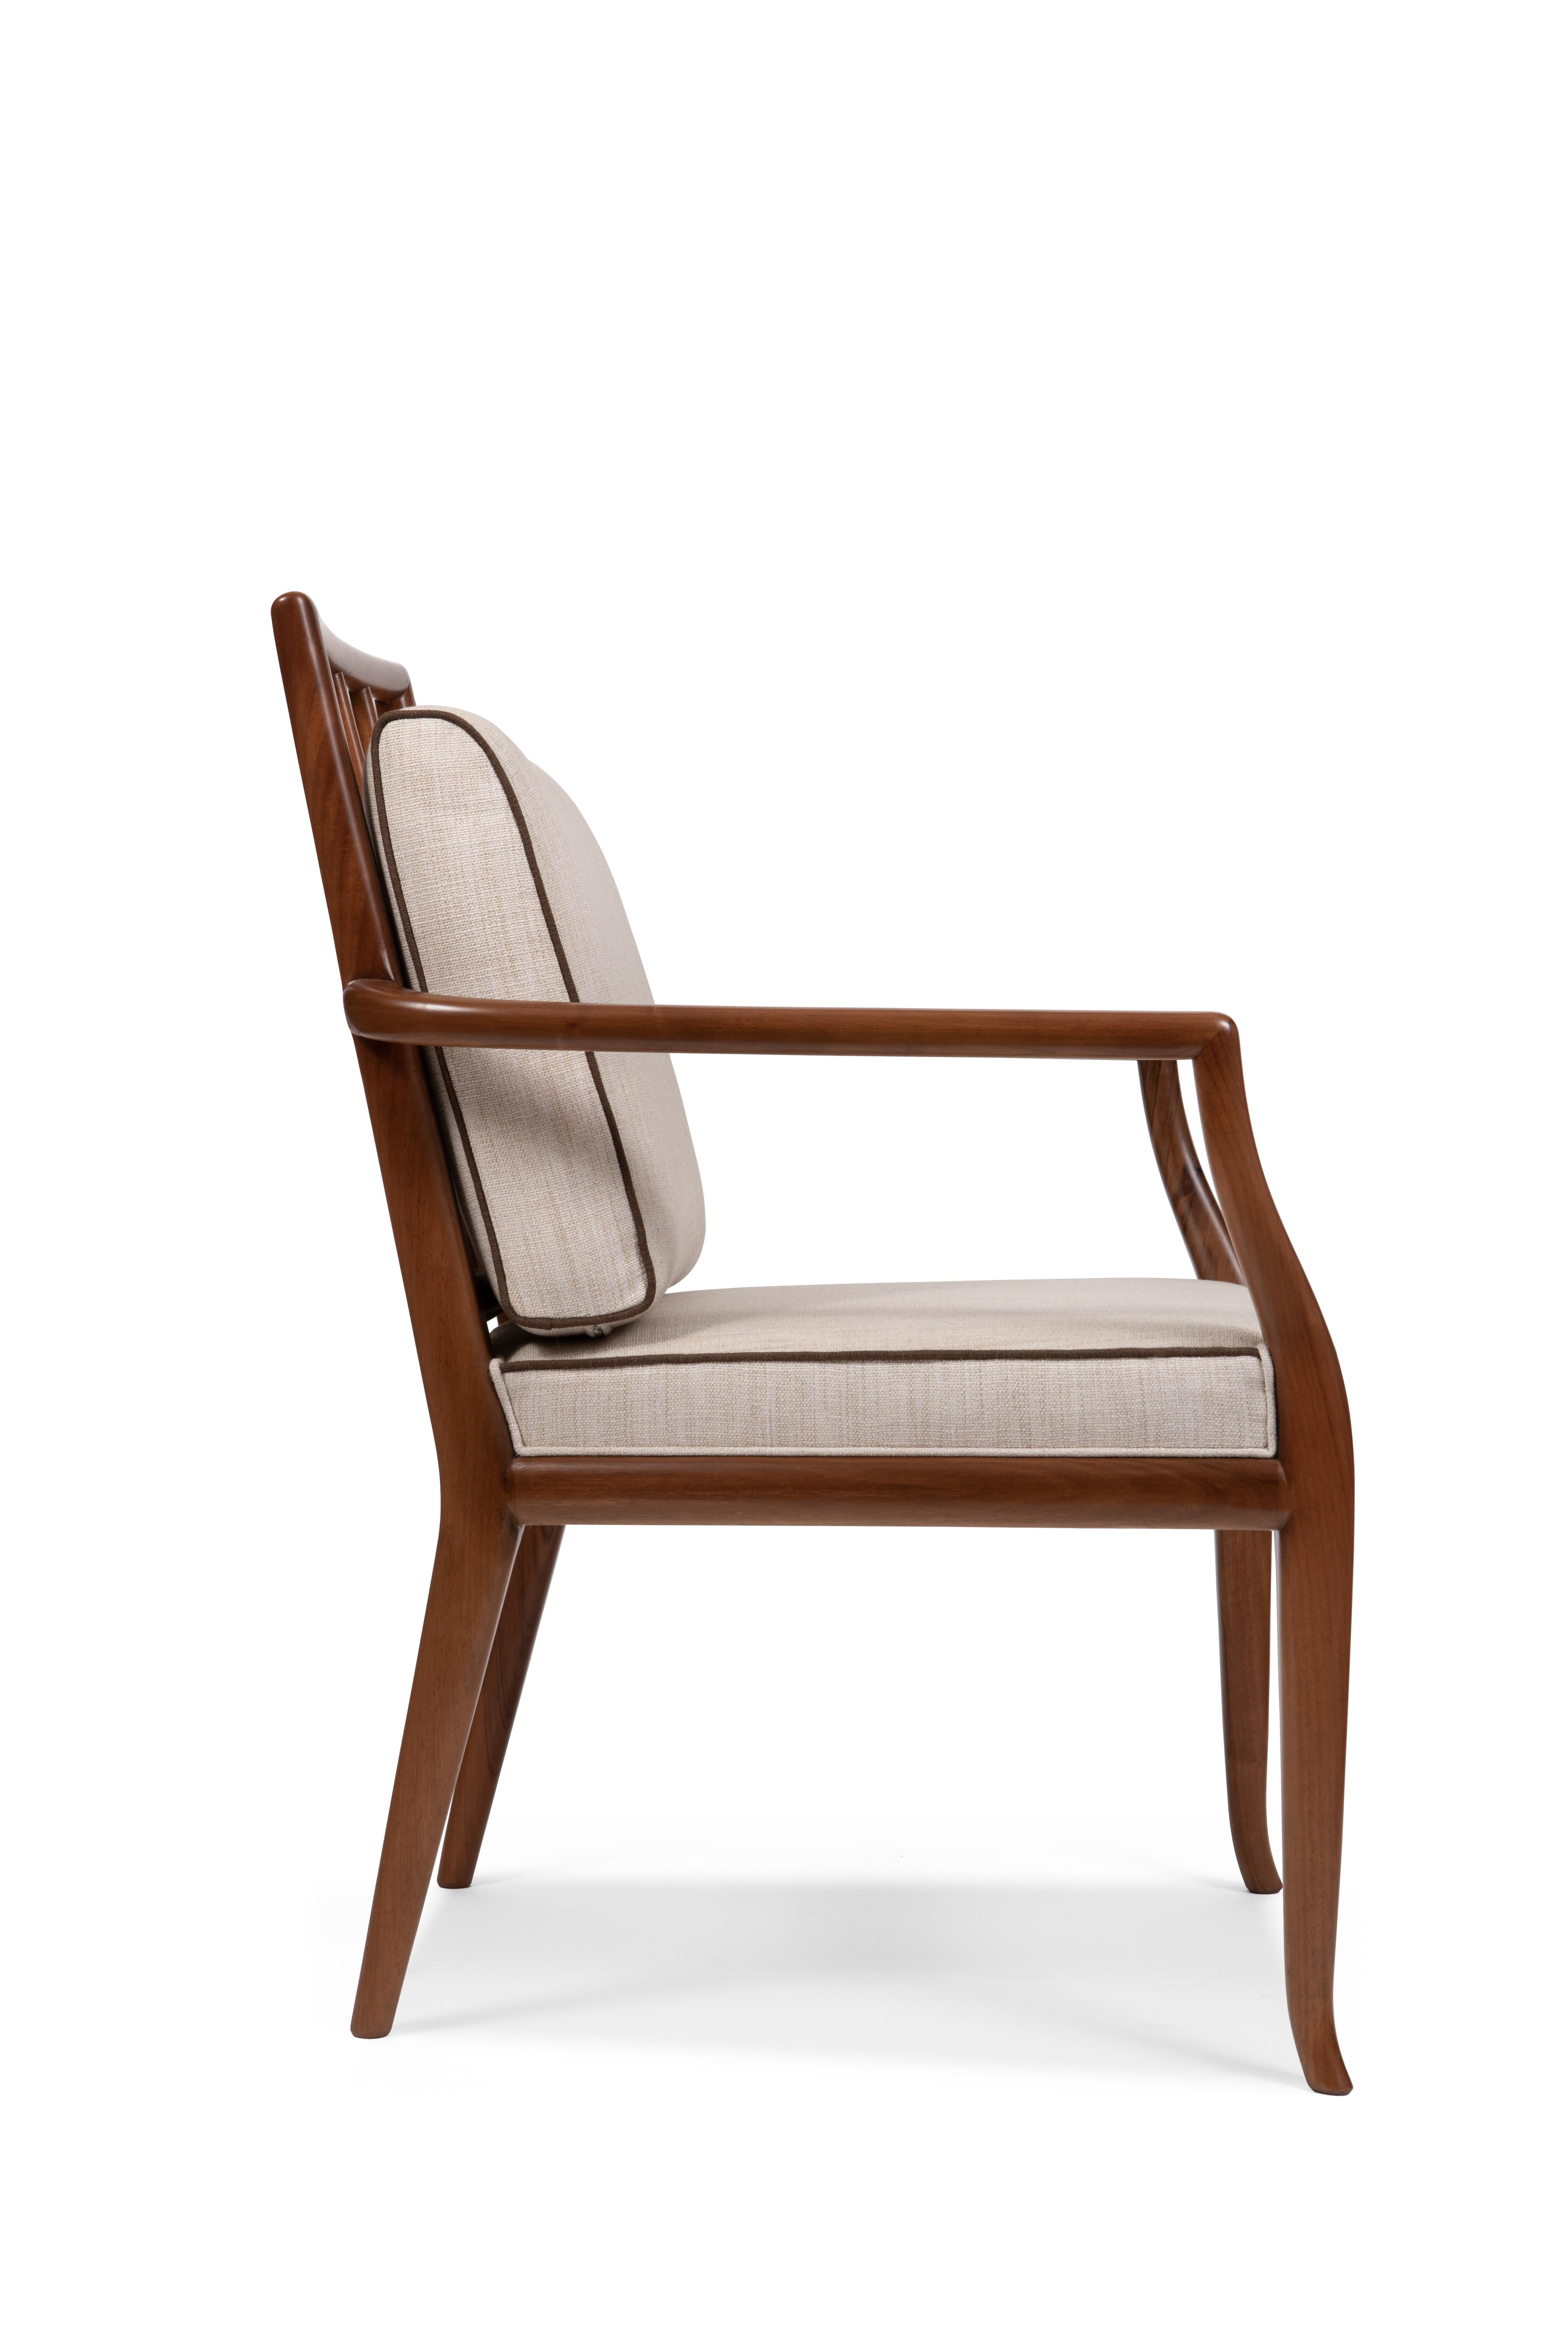 Contemporary Style Walnut Frame Dining Chair with Armrests, Made in Italy In New Condition For Sale In Barlassina, IT